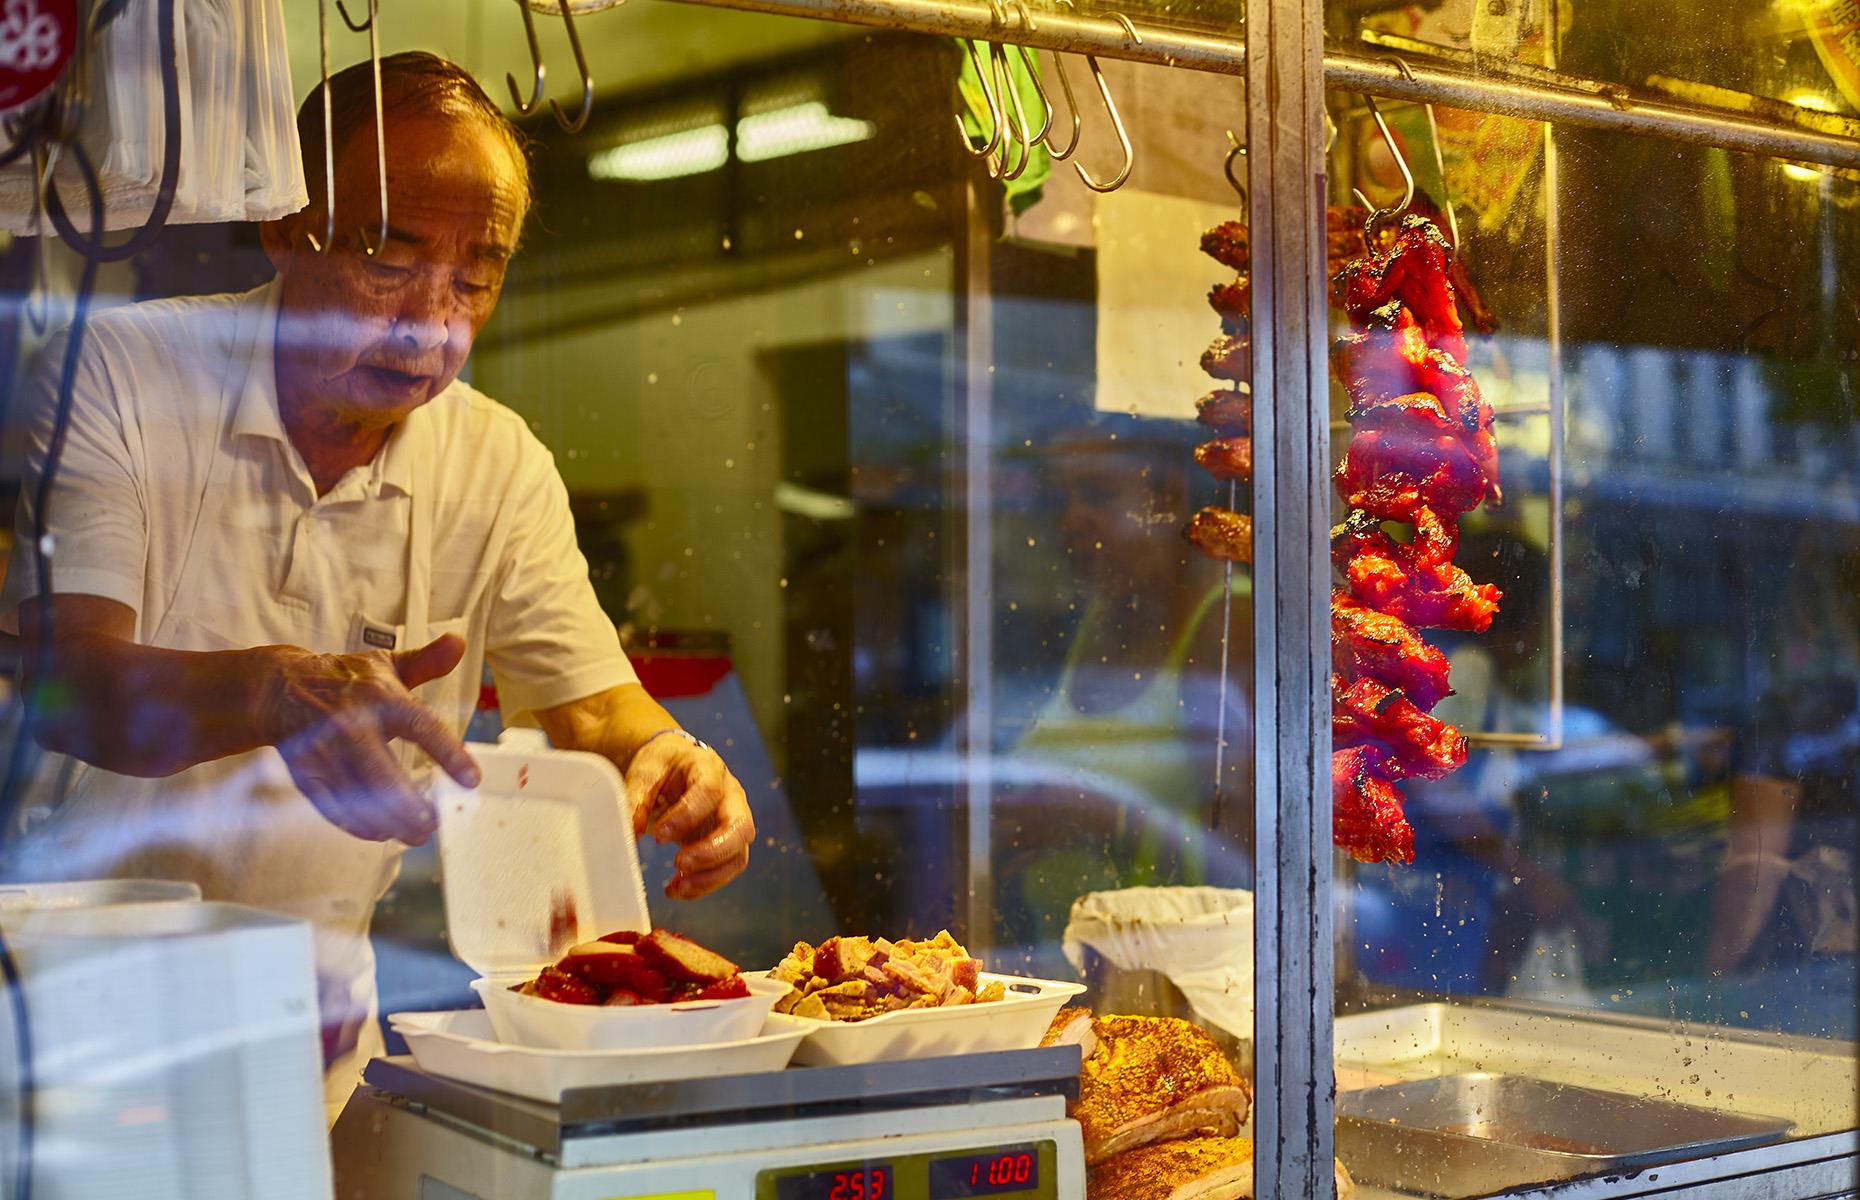 <p>Spend a delicious three hours digging into Honolulu's Chinatown district on <a href="https://www.tastingoahu.com/food-tours/chinatown/">this focused food tour</a>. You'll graze on dishes such as Chinese-style barbecued pork and delicate dim sum as you move between some of the city's most historic restaurants. Along the way you'll see fascinating architectural sights such as the Buddhist Kuan Yin Temple. </p>